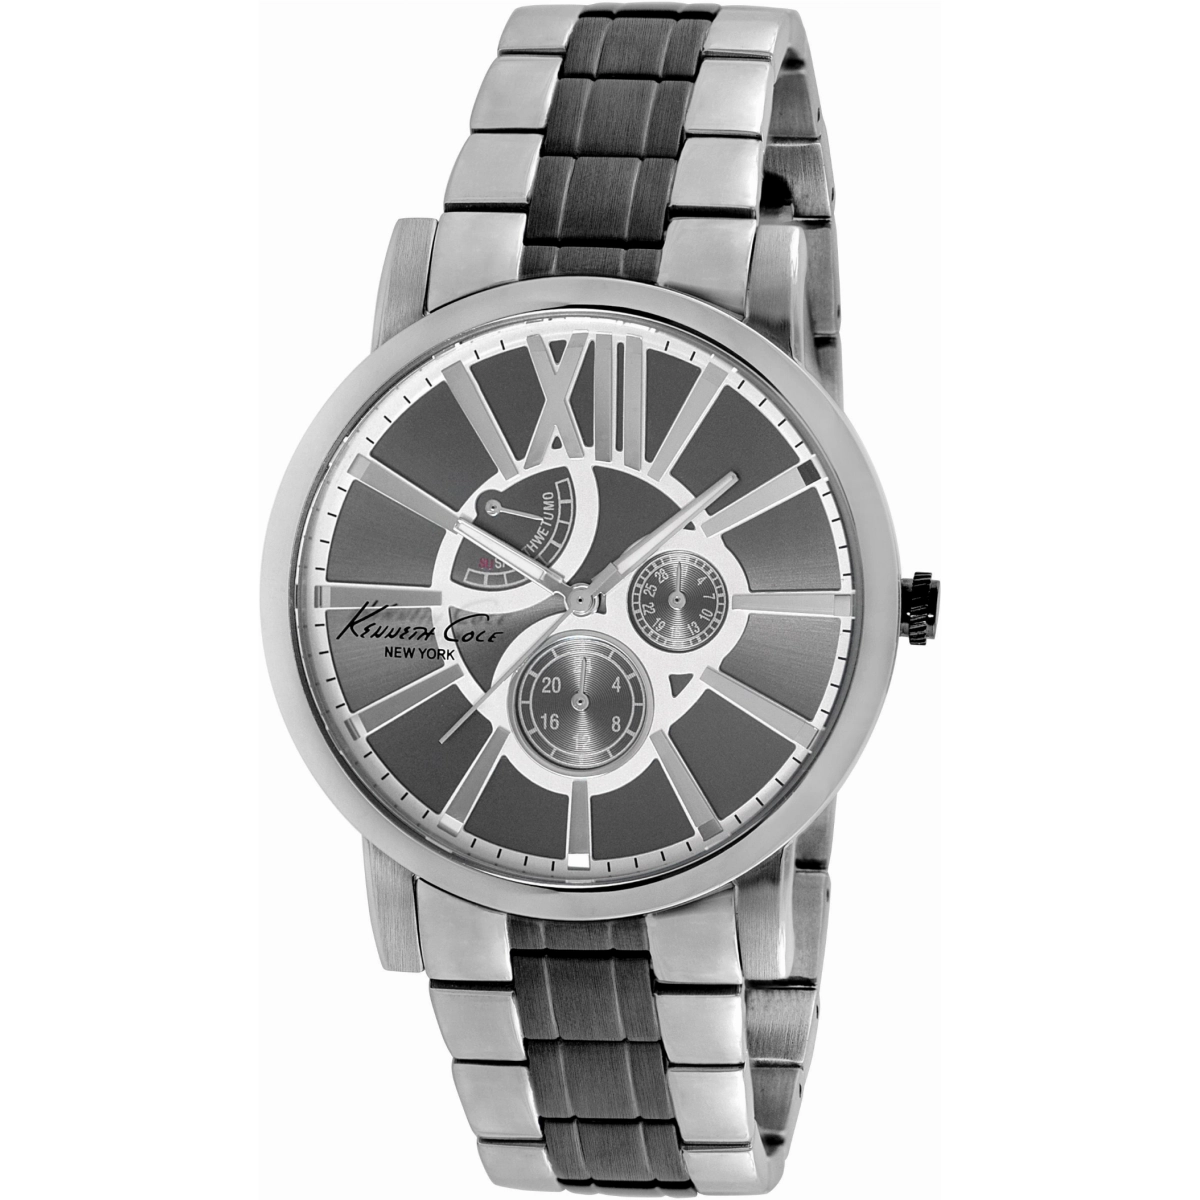 WATCH ANALOG MENS KENNETH COLE IKC9282